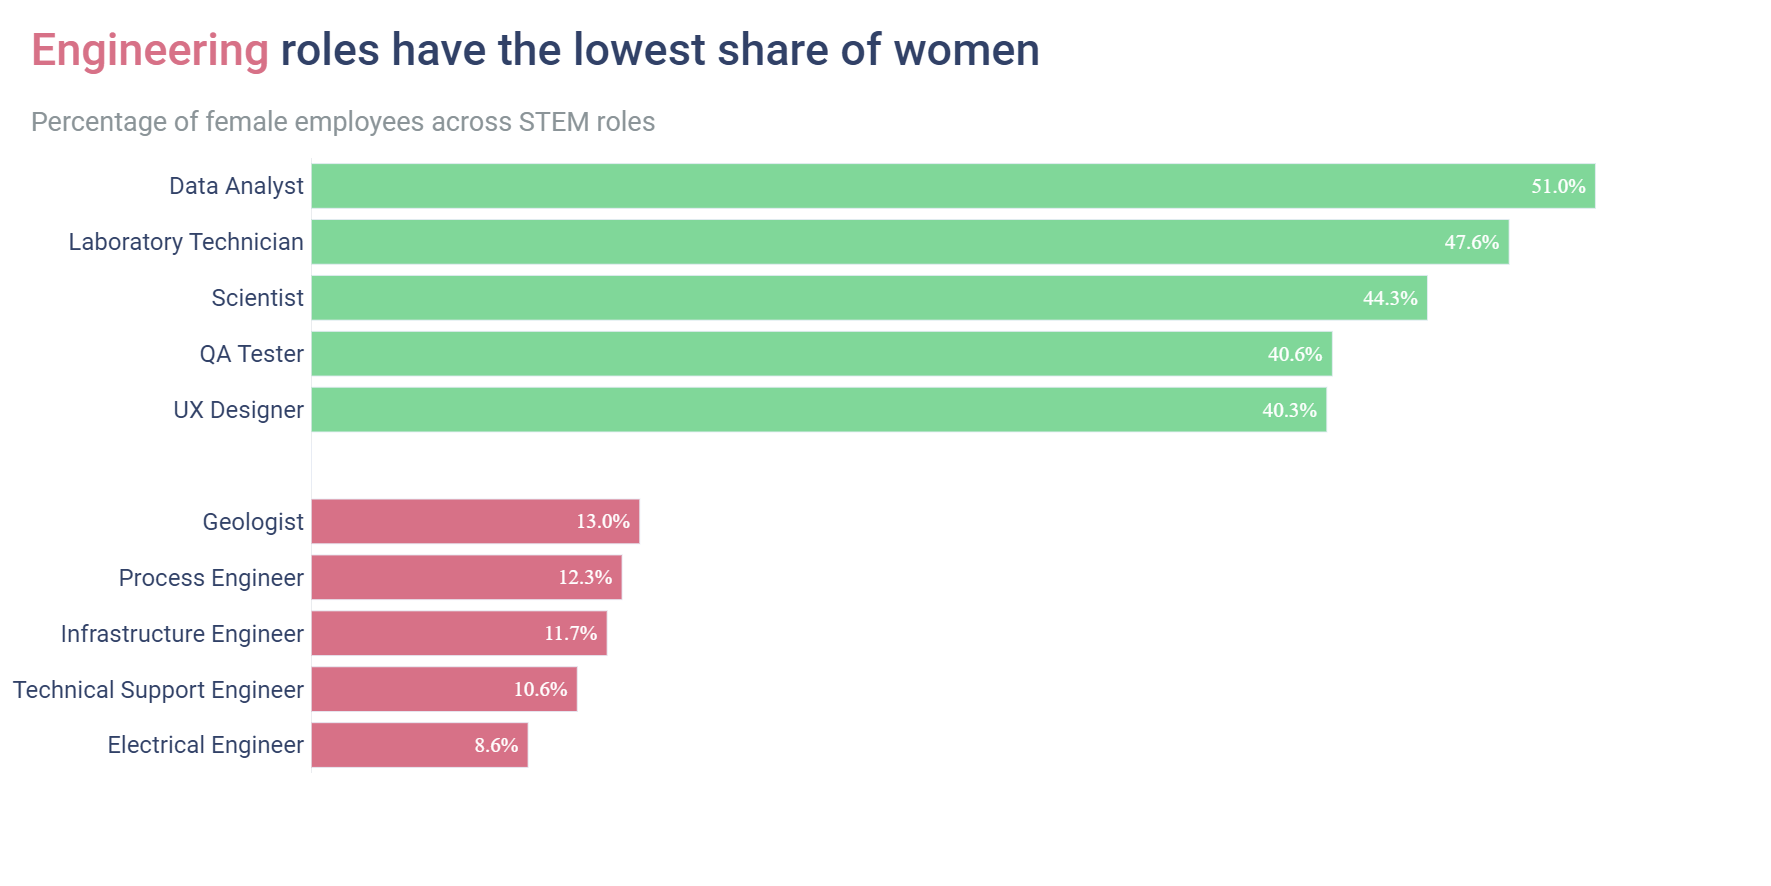 Engineering roles have the lowest representation of women